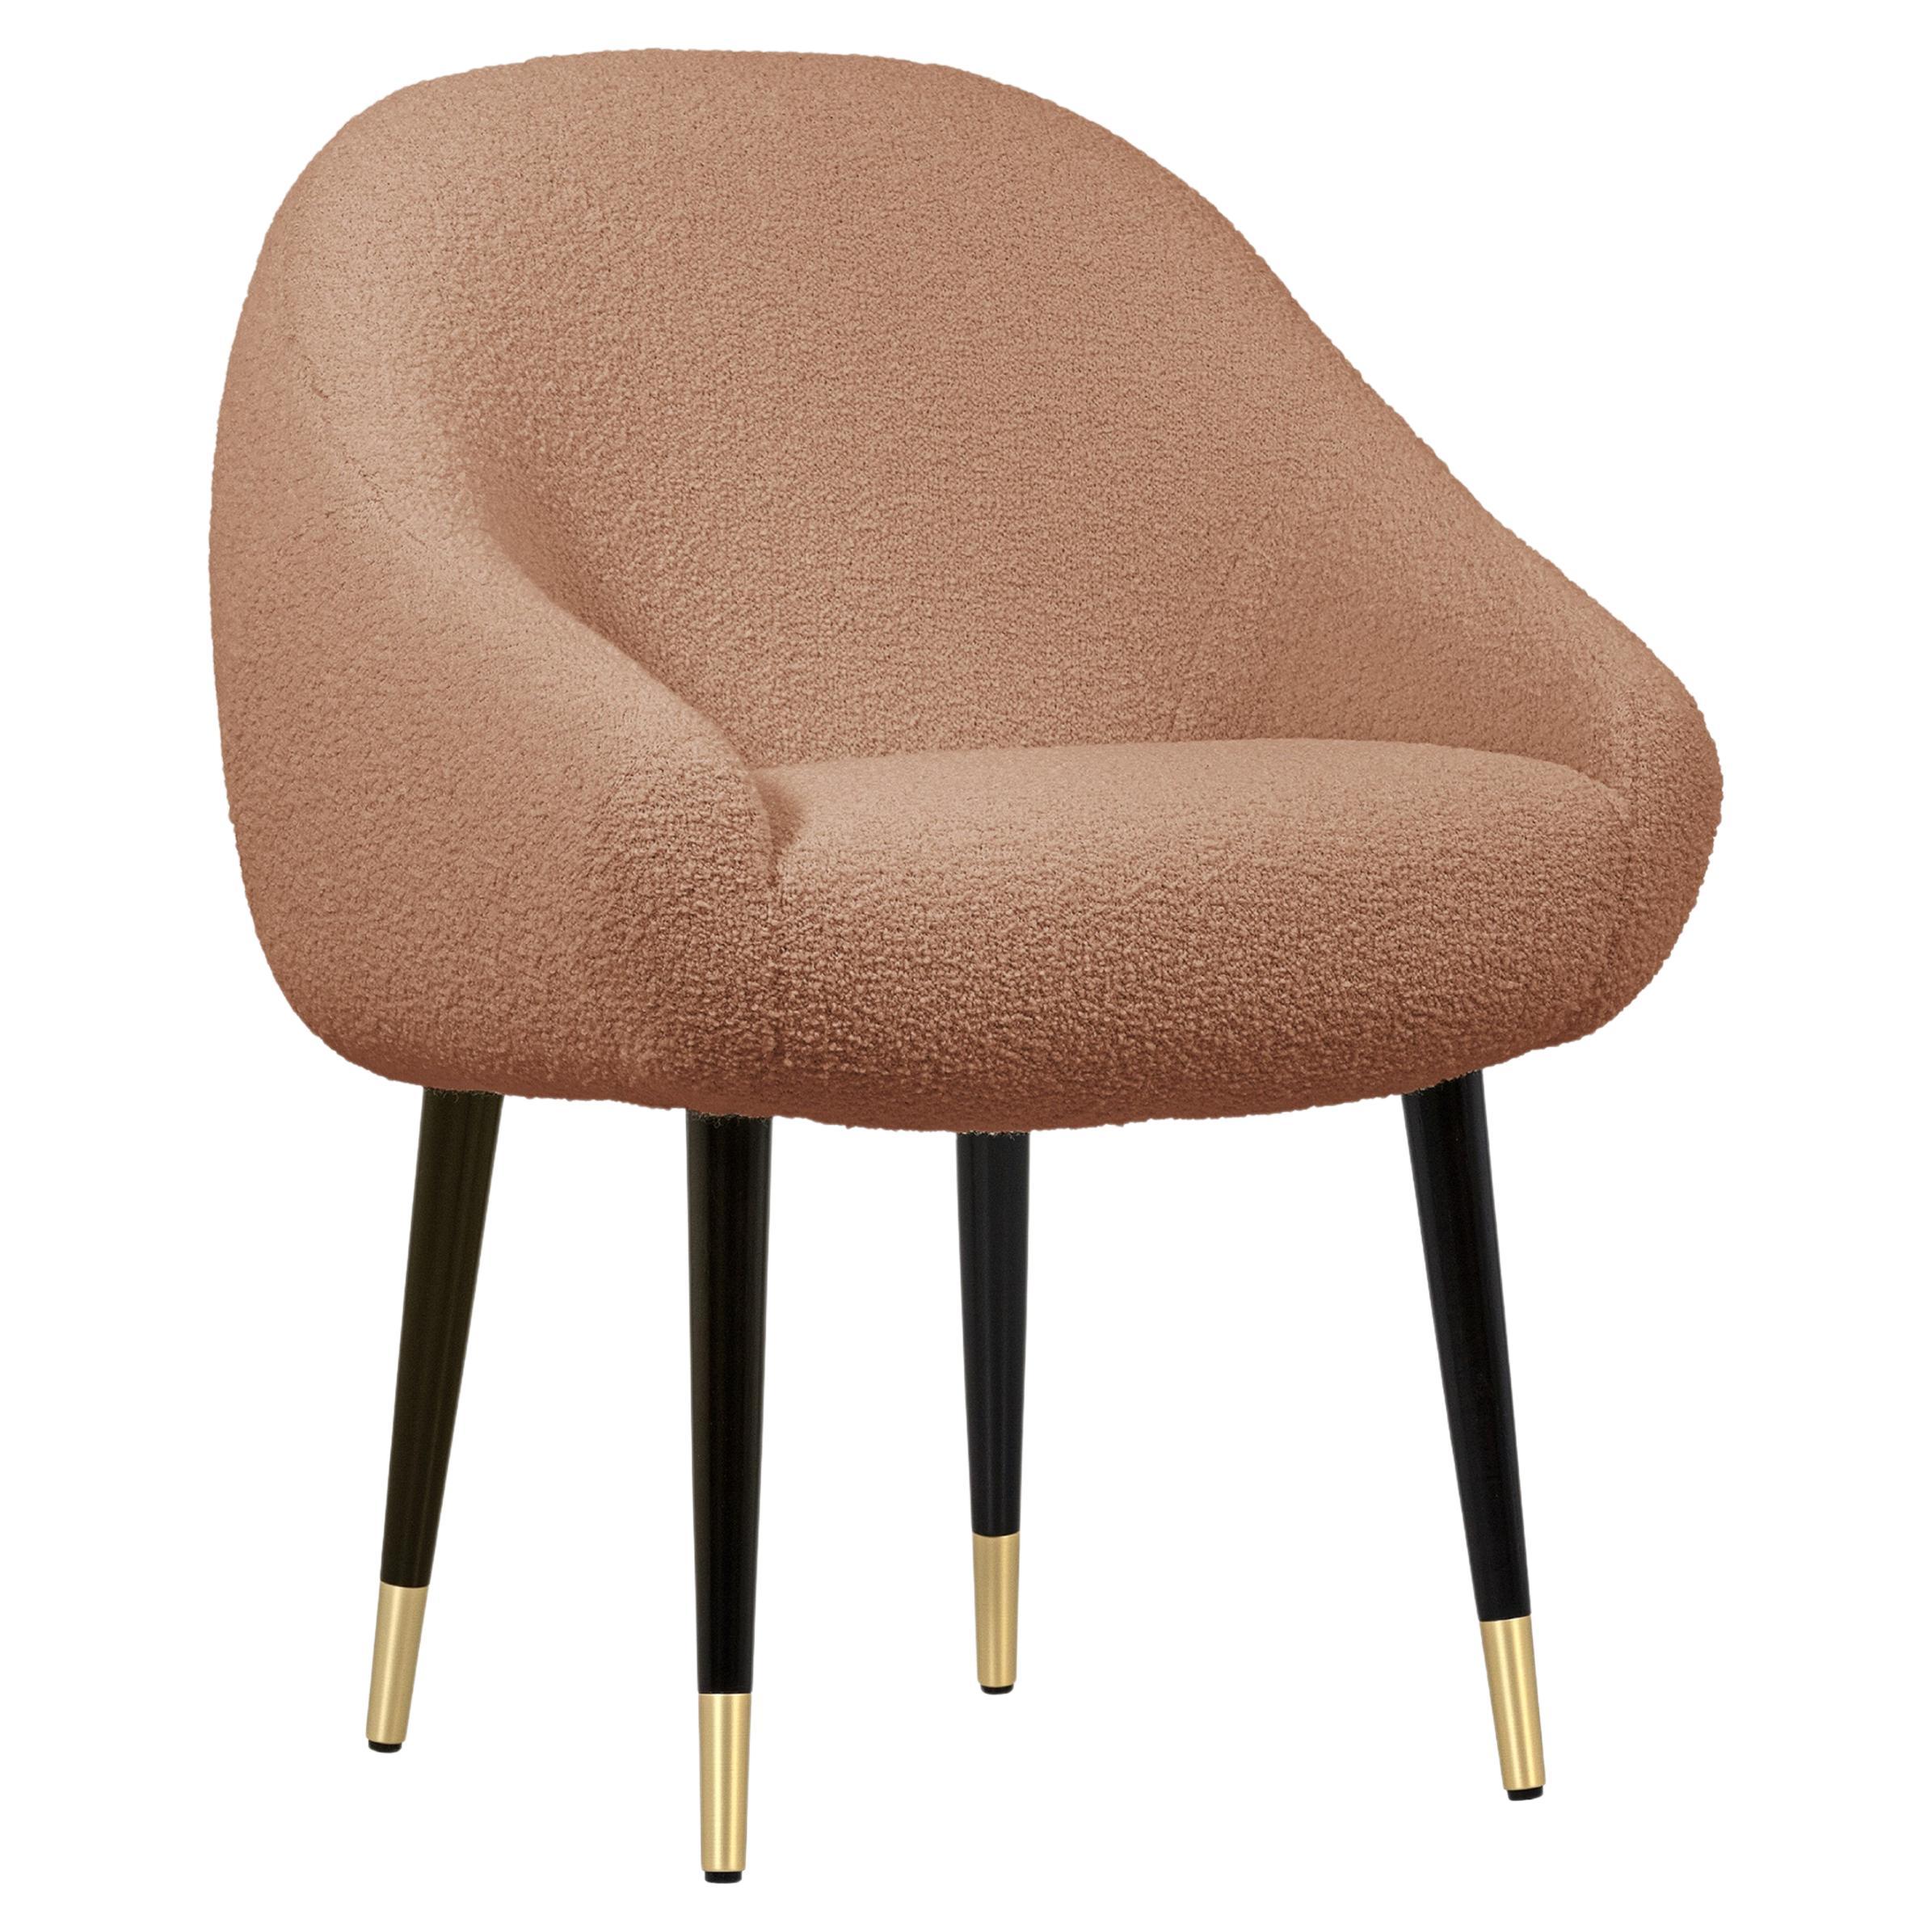 Niemeyer Dining Chair, Bouclé and Brass, Insidherland by Joana Santos Barbosa For Sale